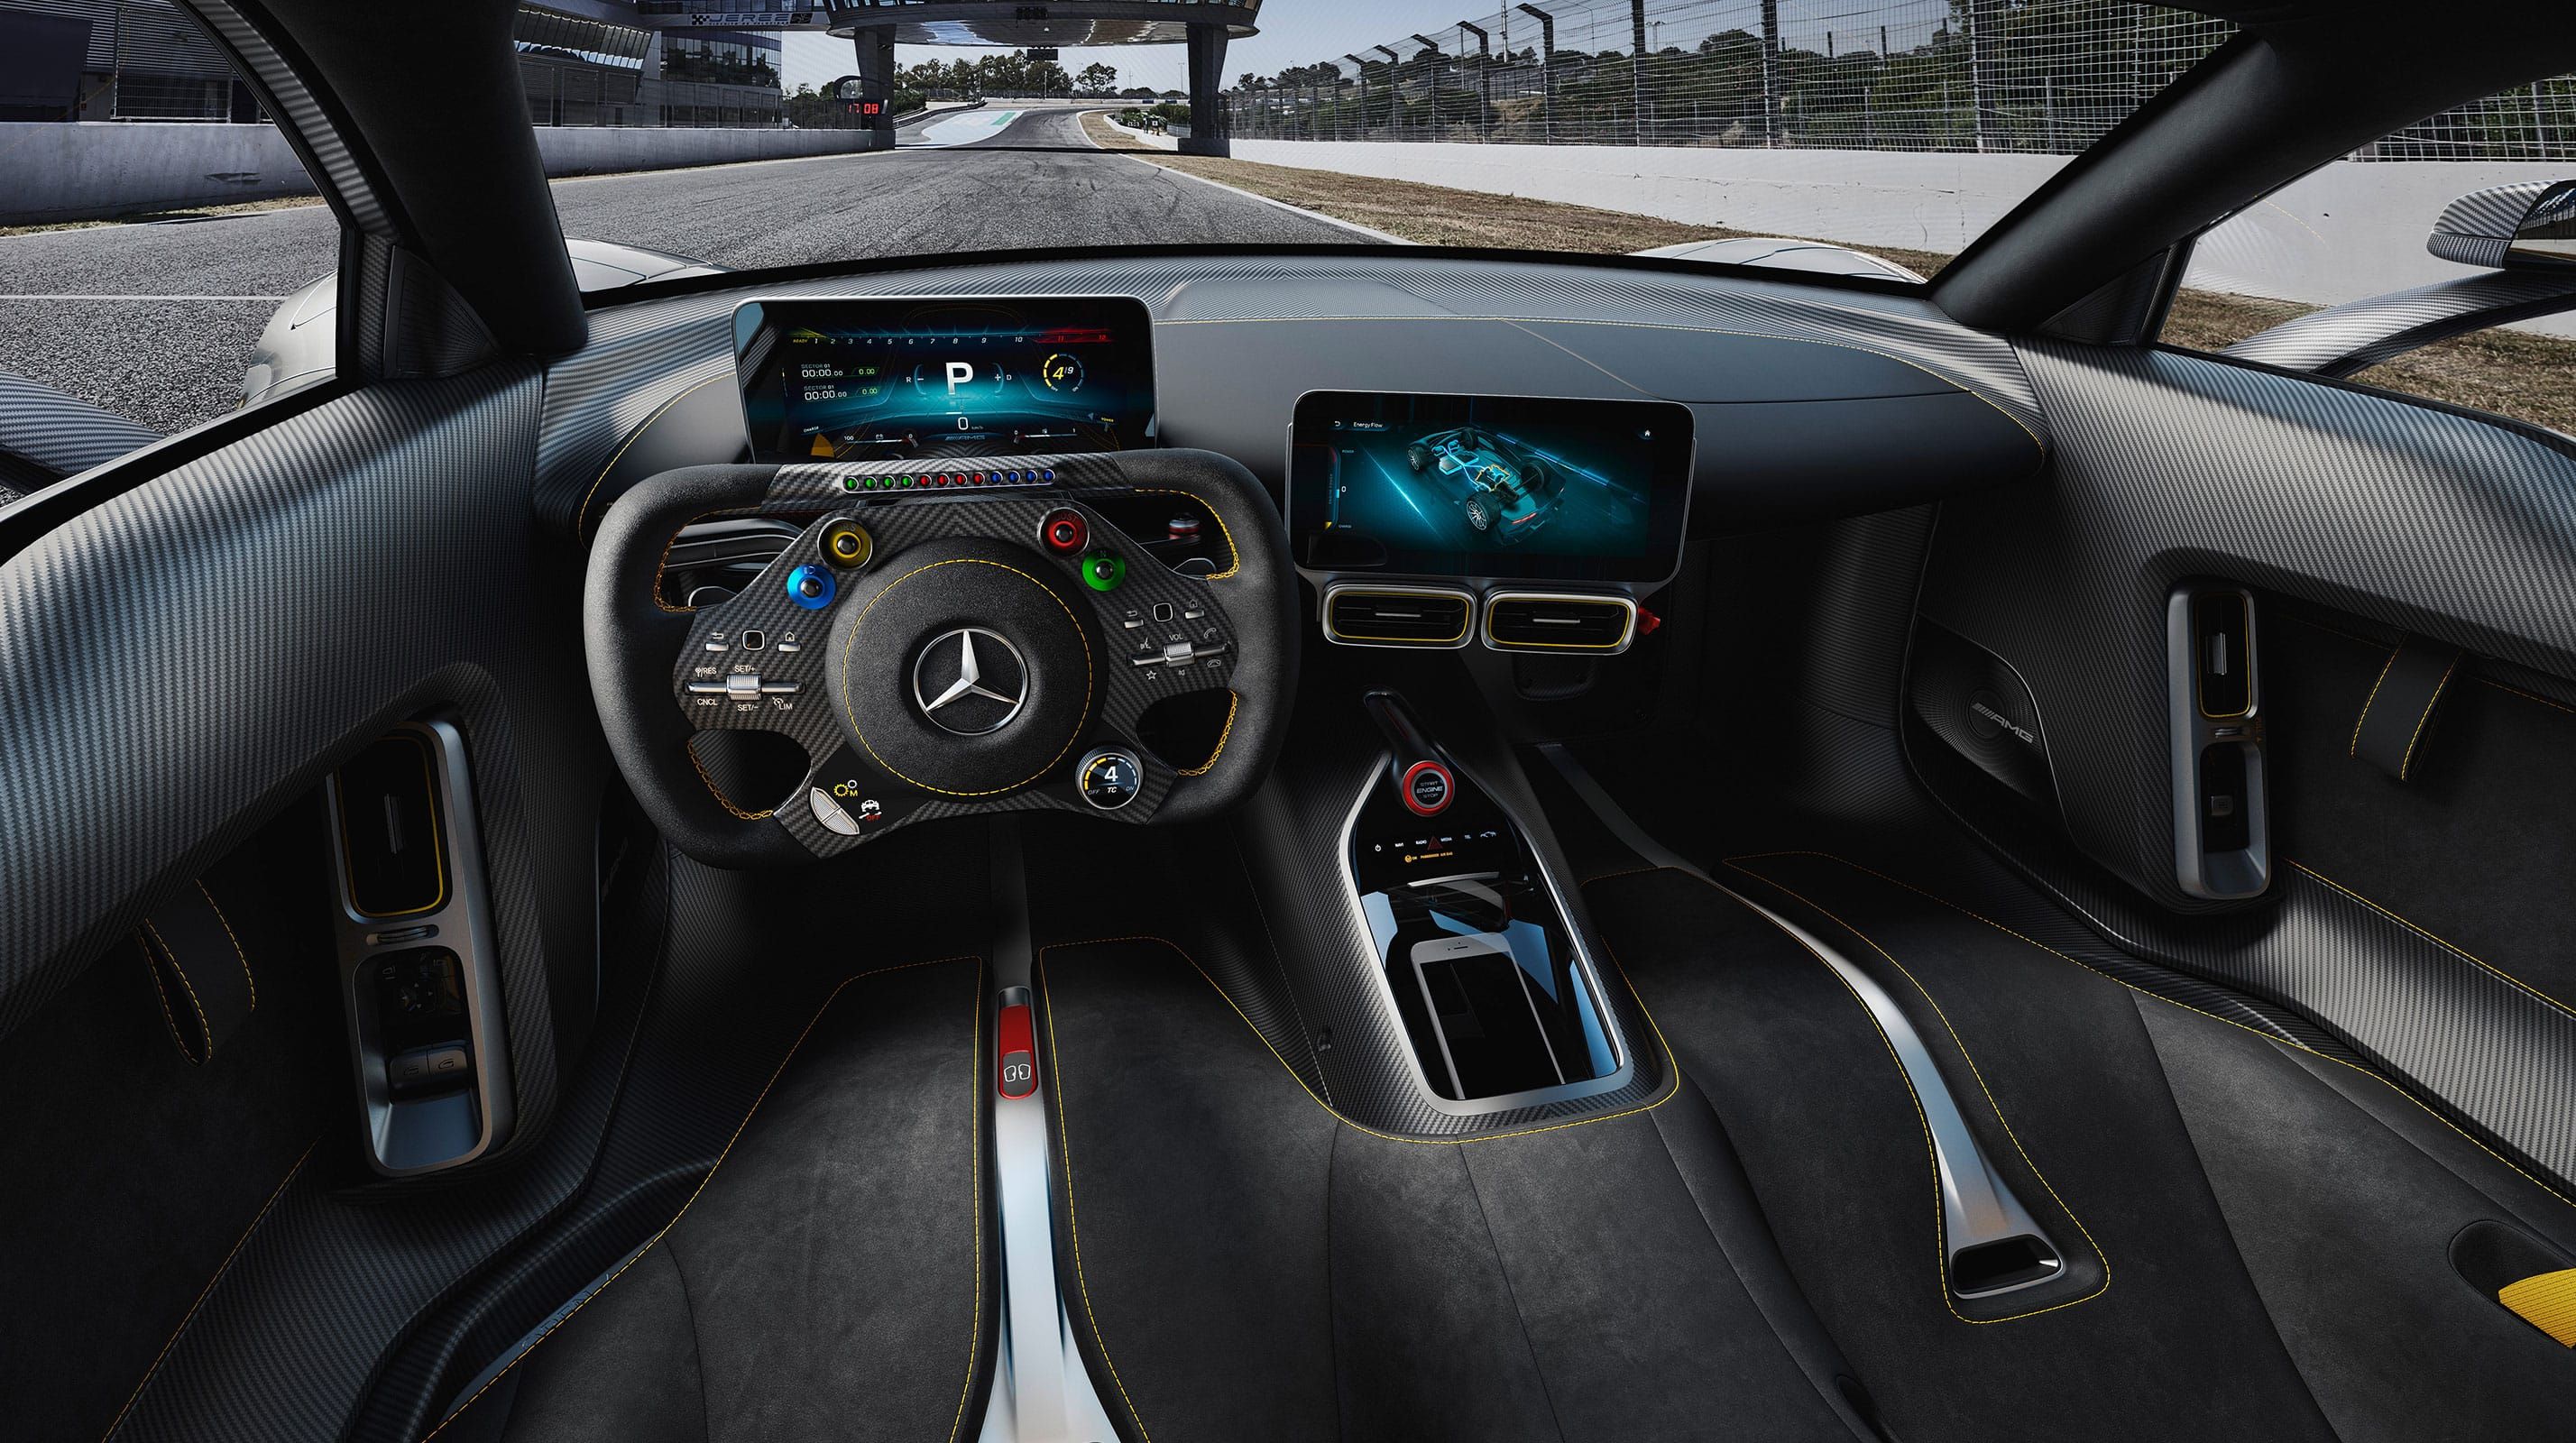 Interior of the Mercedes AMG One